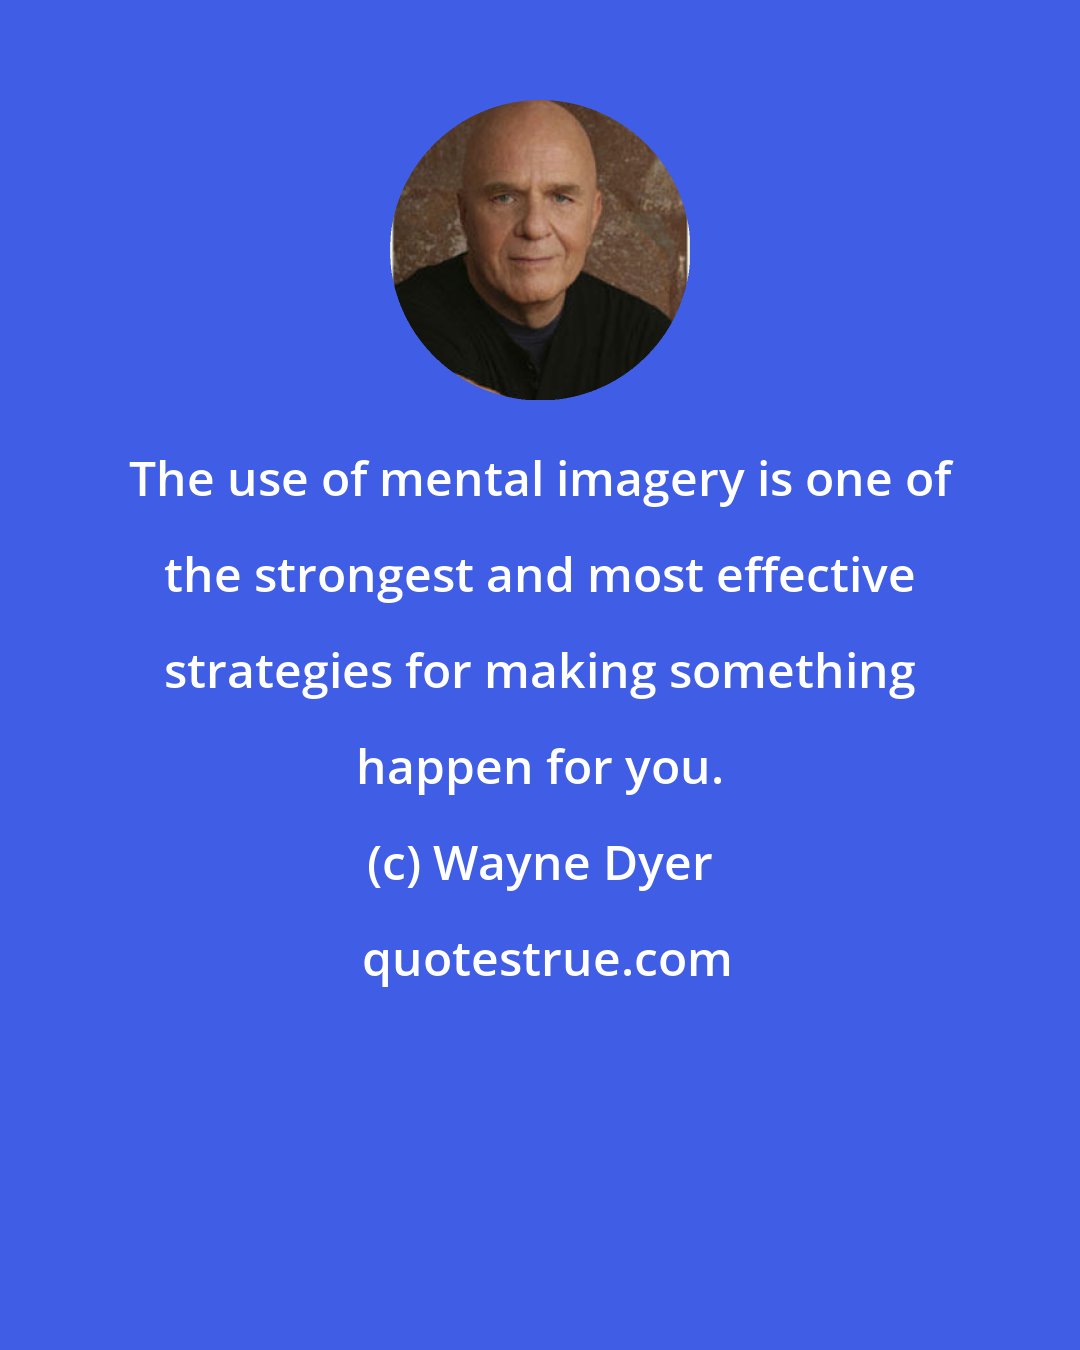 Wayne Dyer: The use of mental imagery is one of the strongest and most effective strategies for making something happen for you.